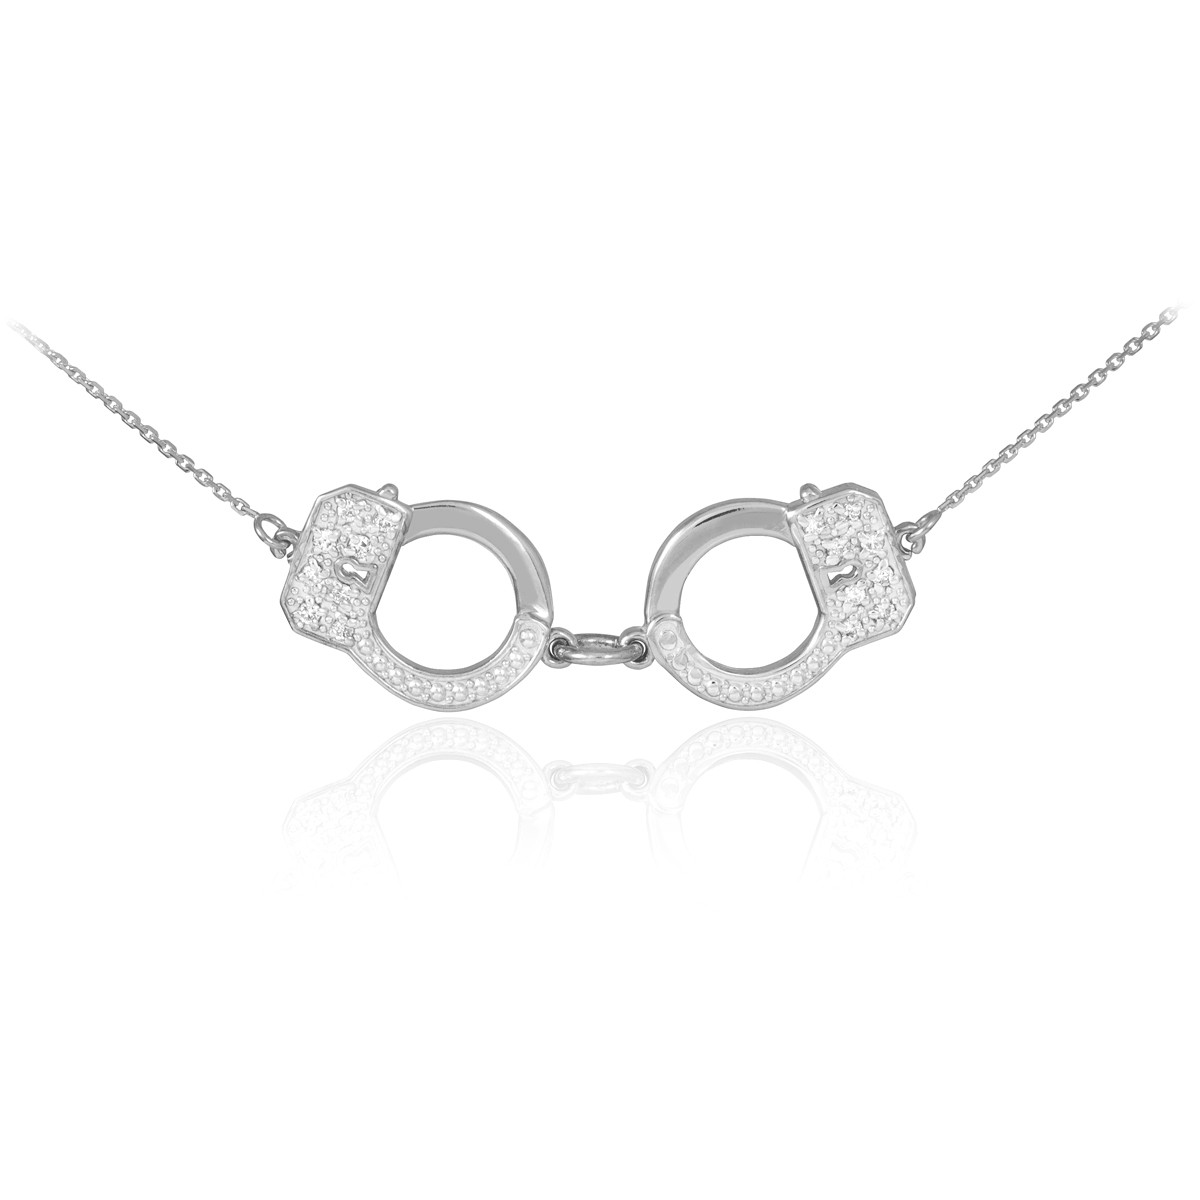 14k White Gold Handcuffs Necklace with Diamond Accents